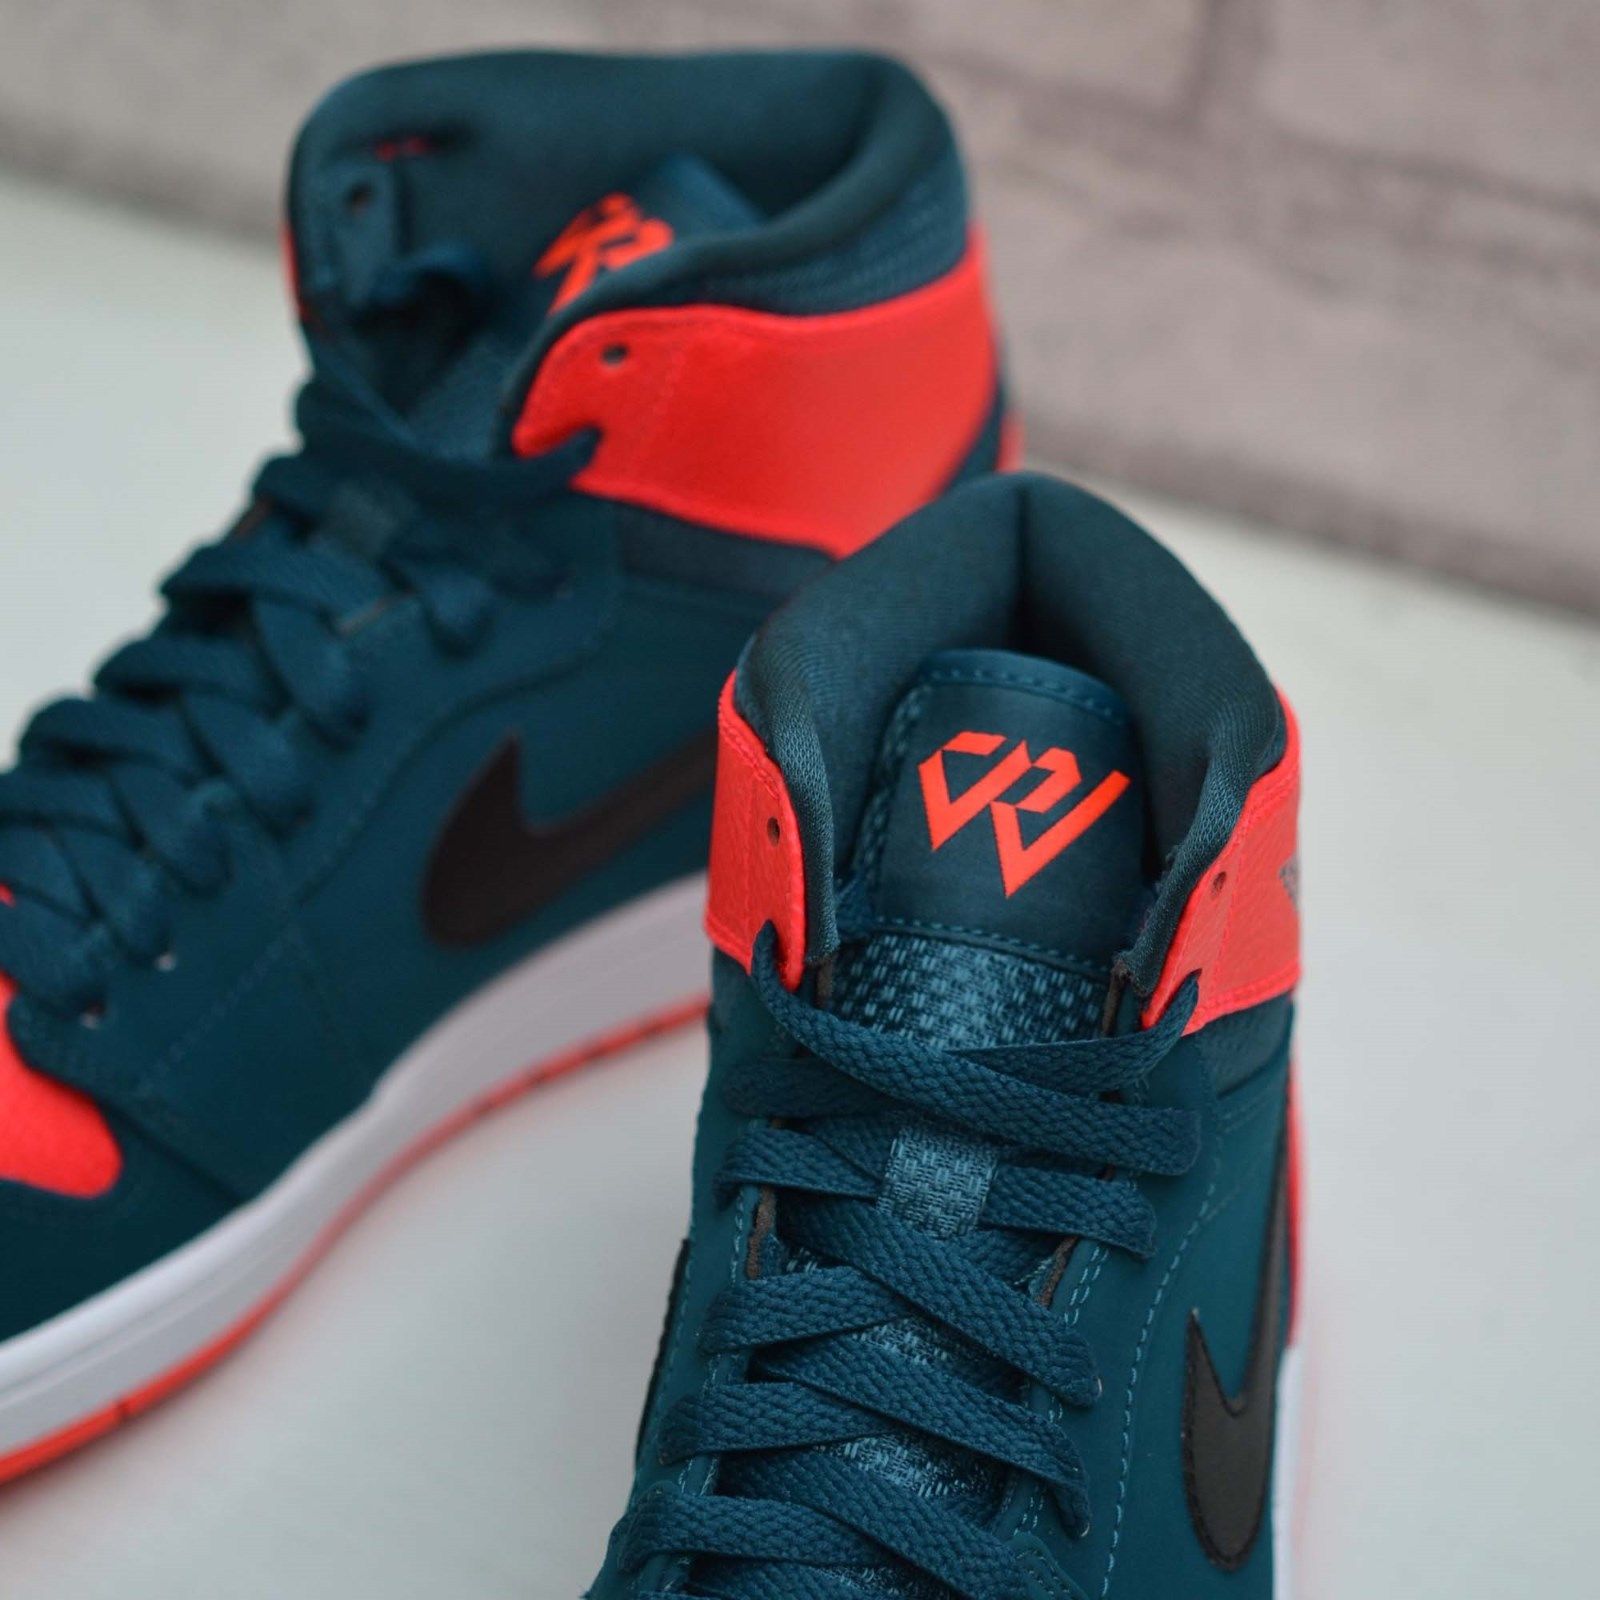 jage Jo da Person med ansvar for sportsspil Air Jordan 1 Retro High 'Russell Westbrook' – Another Look - WearTesters